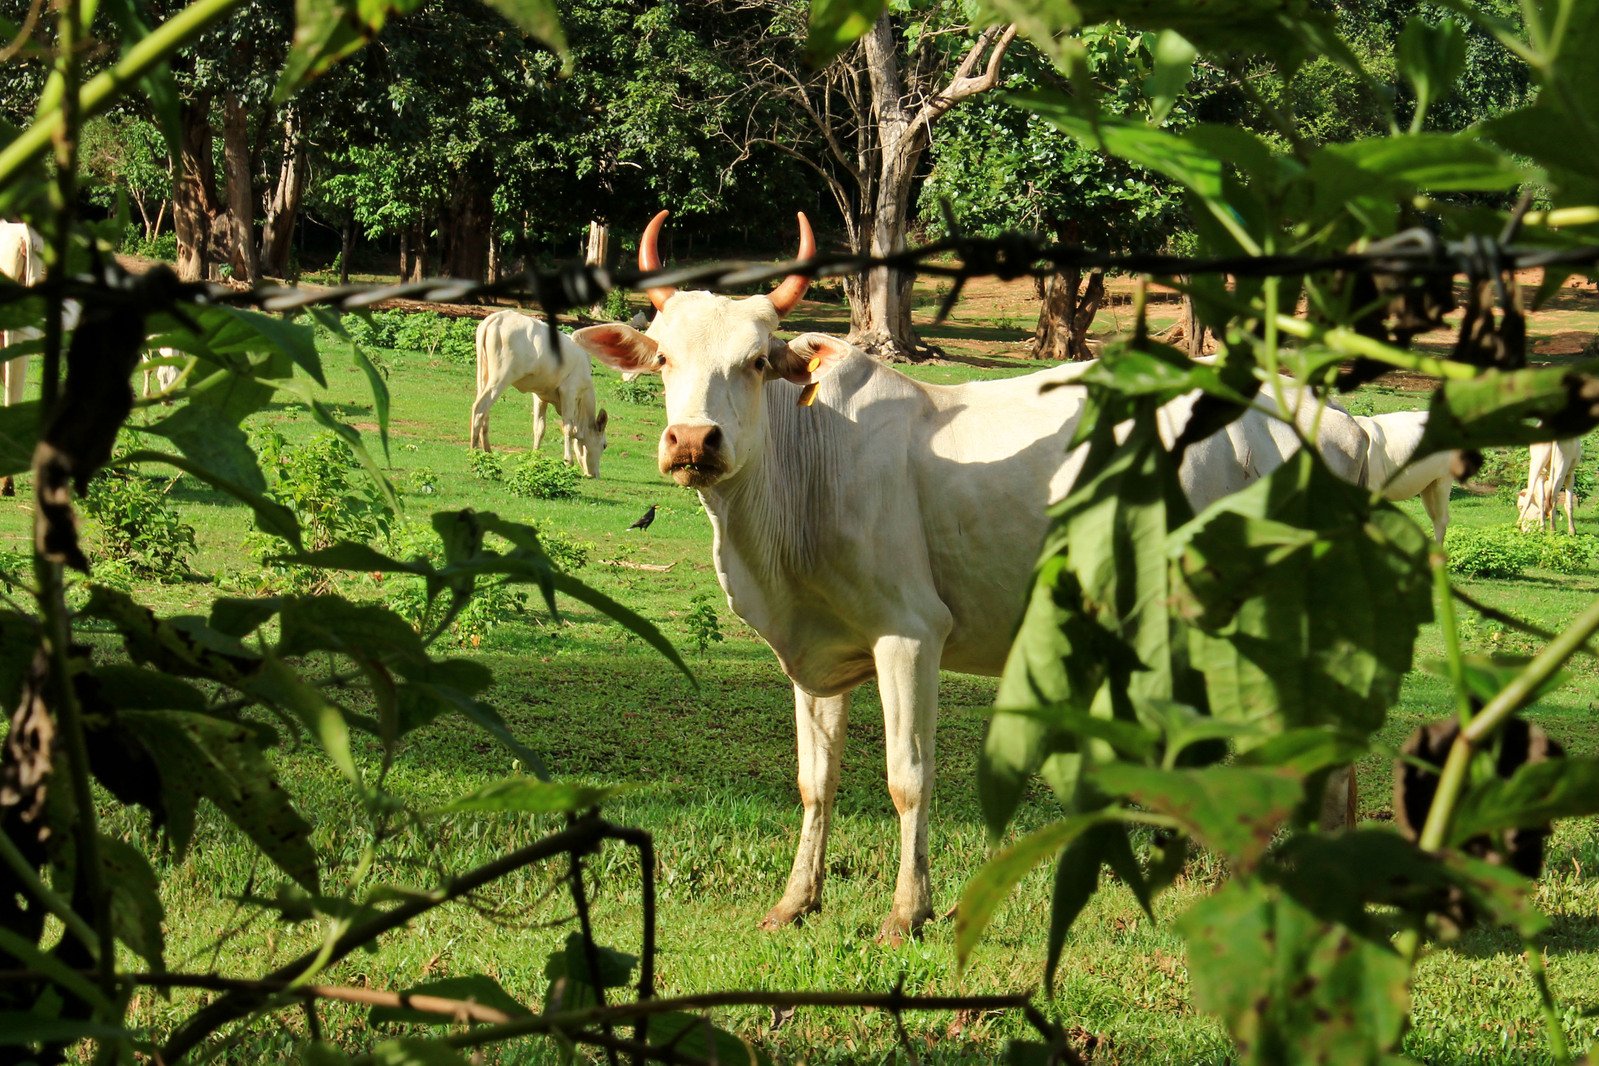 several cows are on the grass in a fenced area